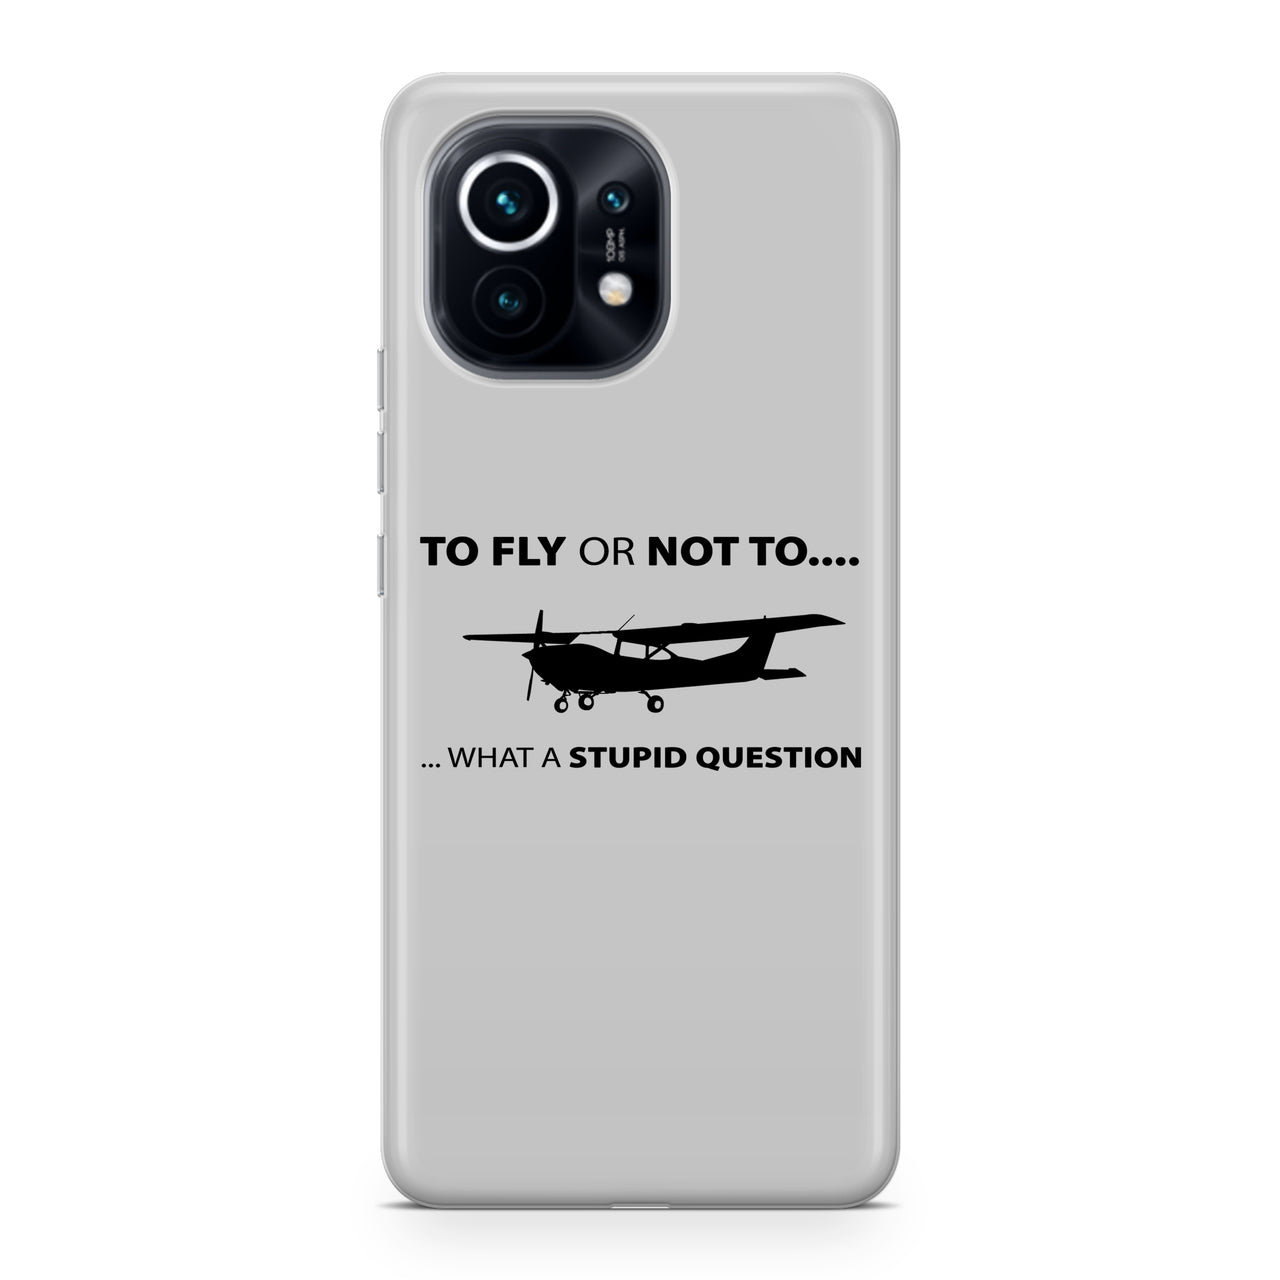 To Fly or Not To What a Stupid Question Designed Xiaomi Cases